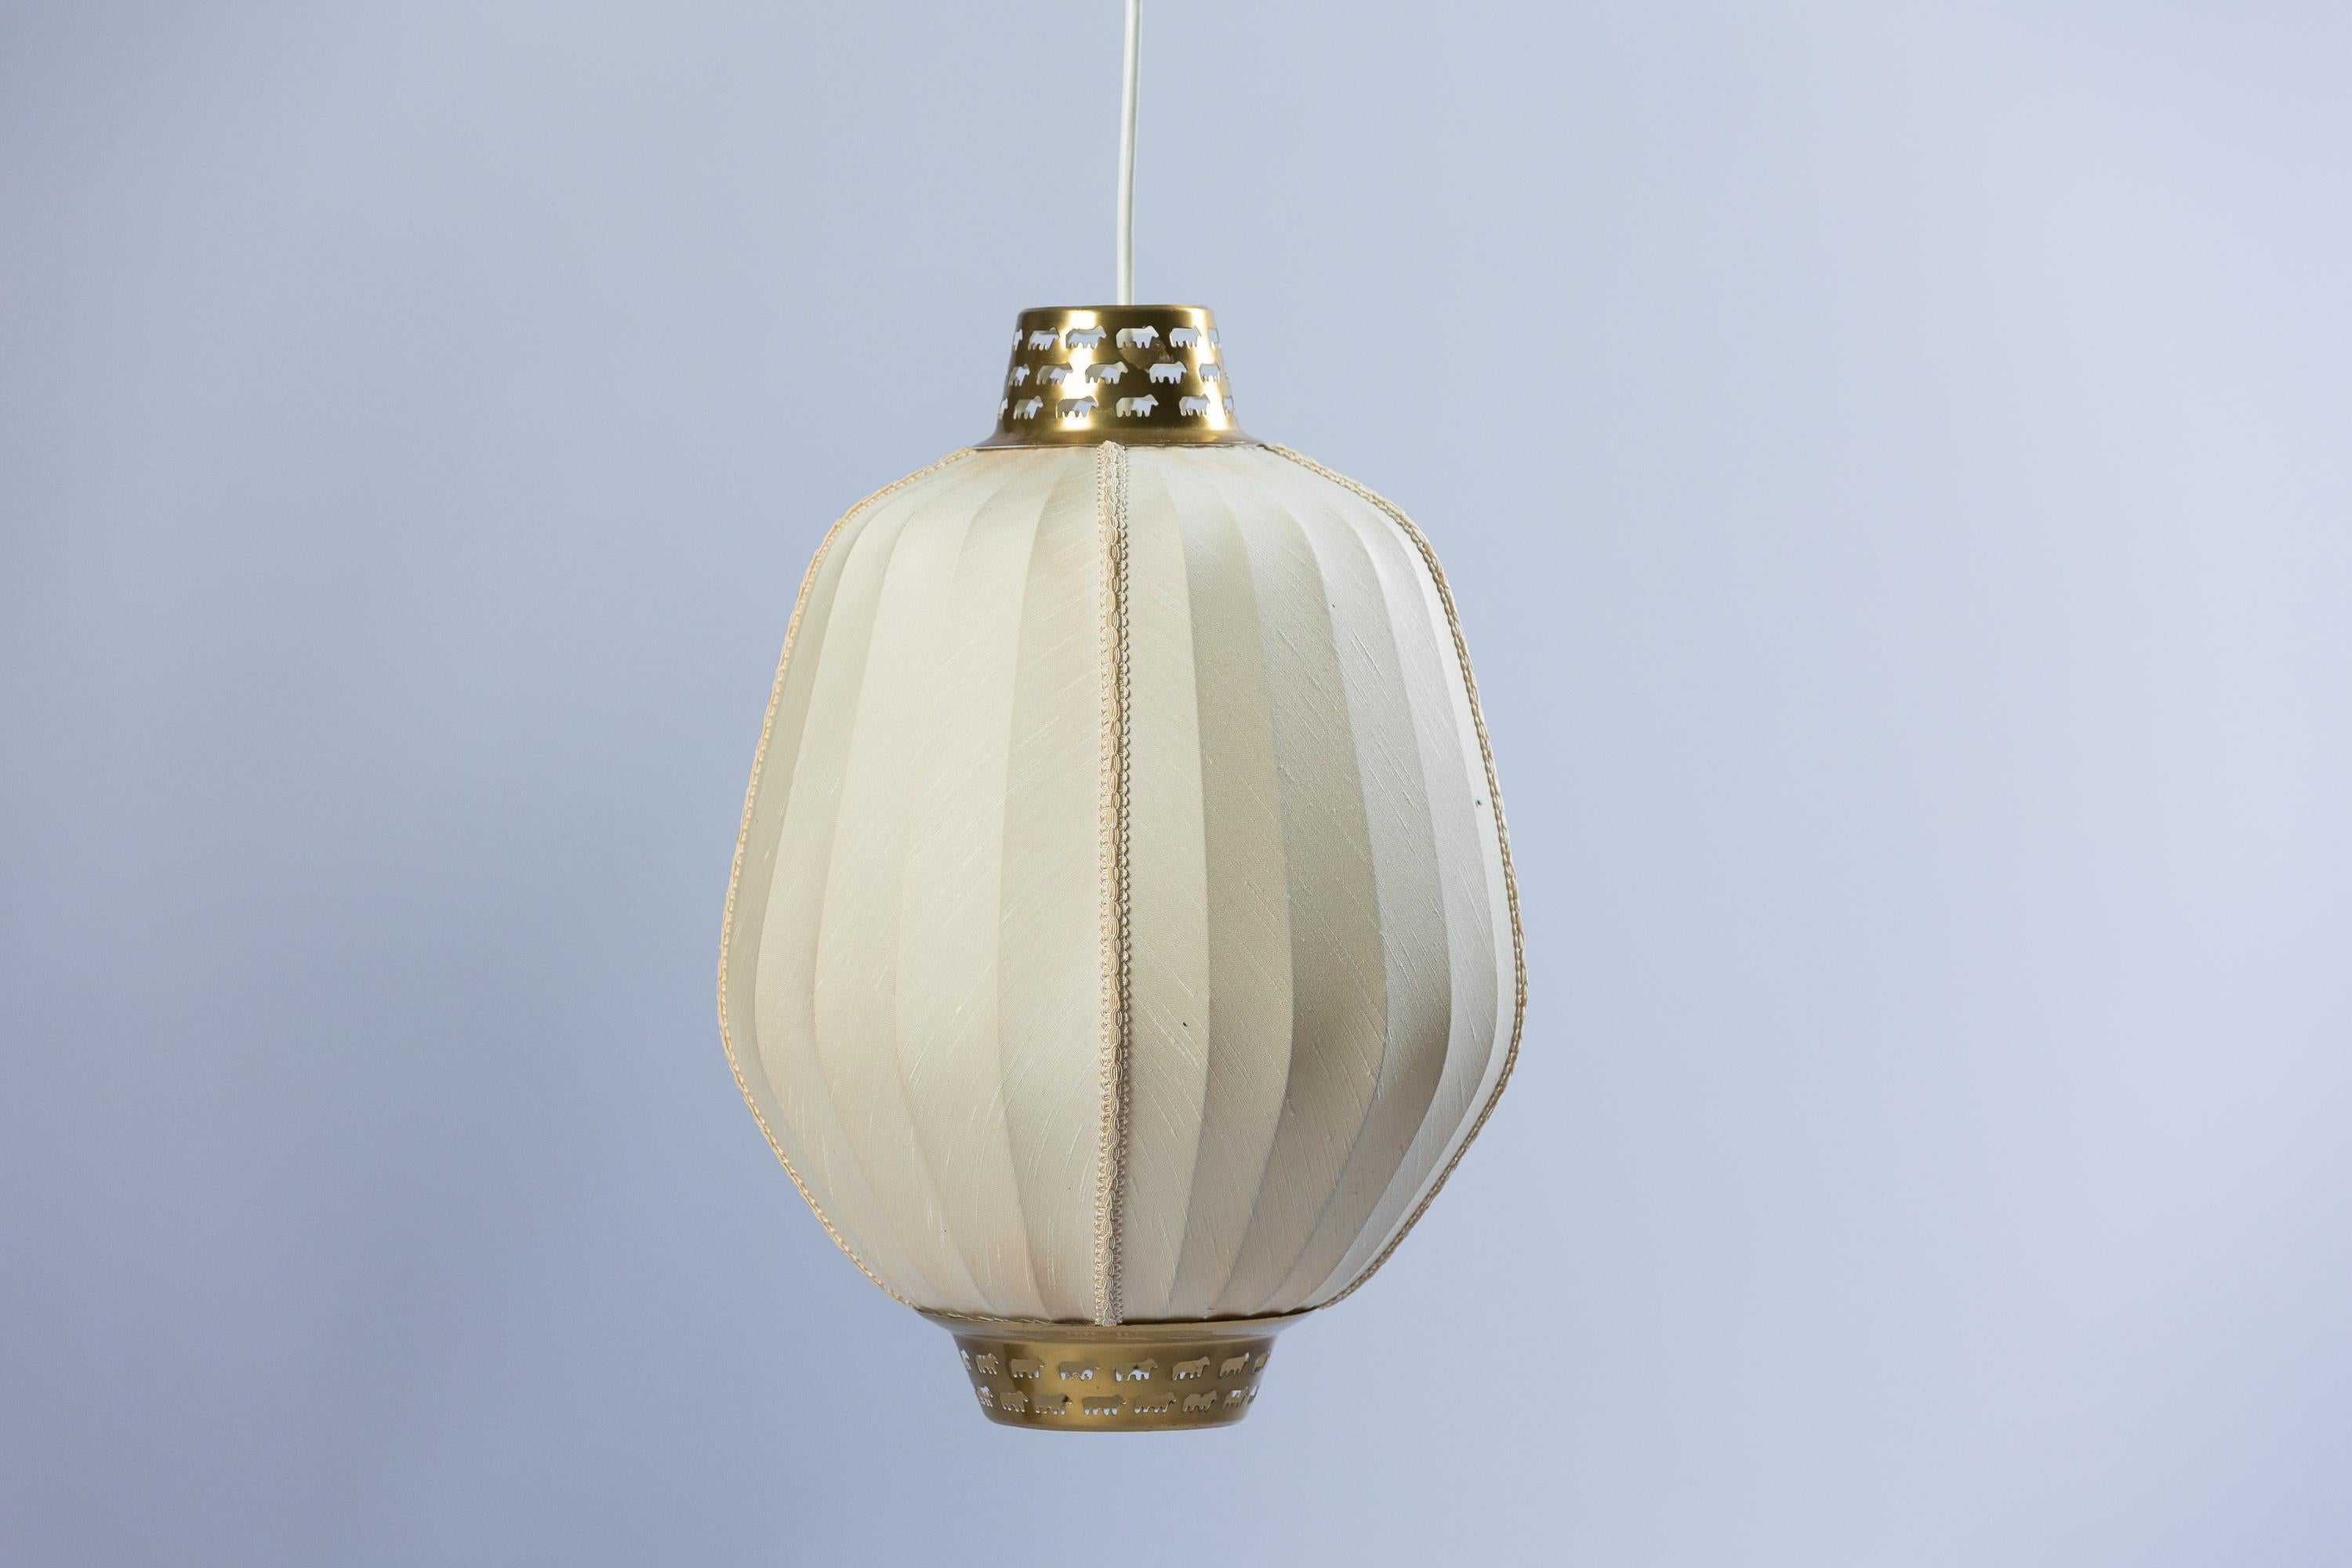 Introducing the timeless elegance of the HANS BERGSTRÖM ceiling lamp model 60, a masterpiece crafted for Ateljé Lyktan in the 1940s. This iconic piece embodies mid-century sophistication and exceptional craftsmanship.

The HANS BERGSTRÖM model 60